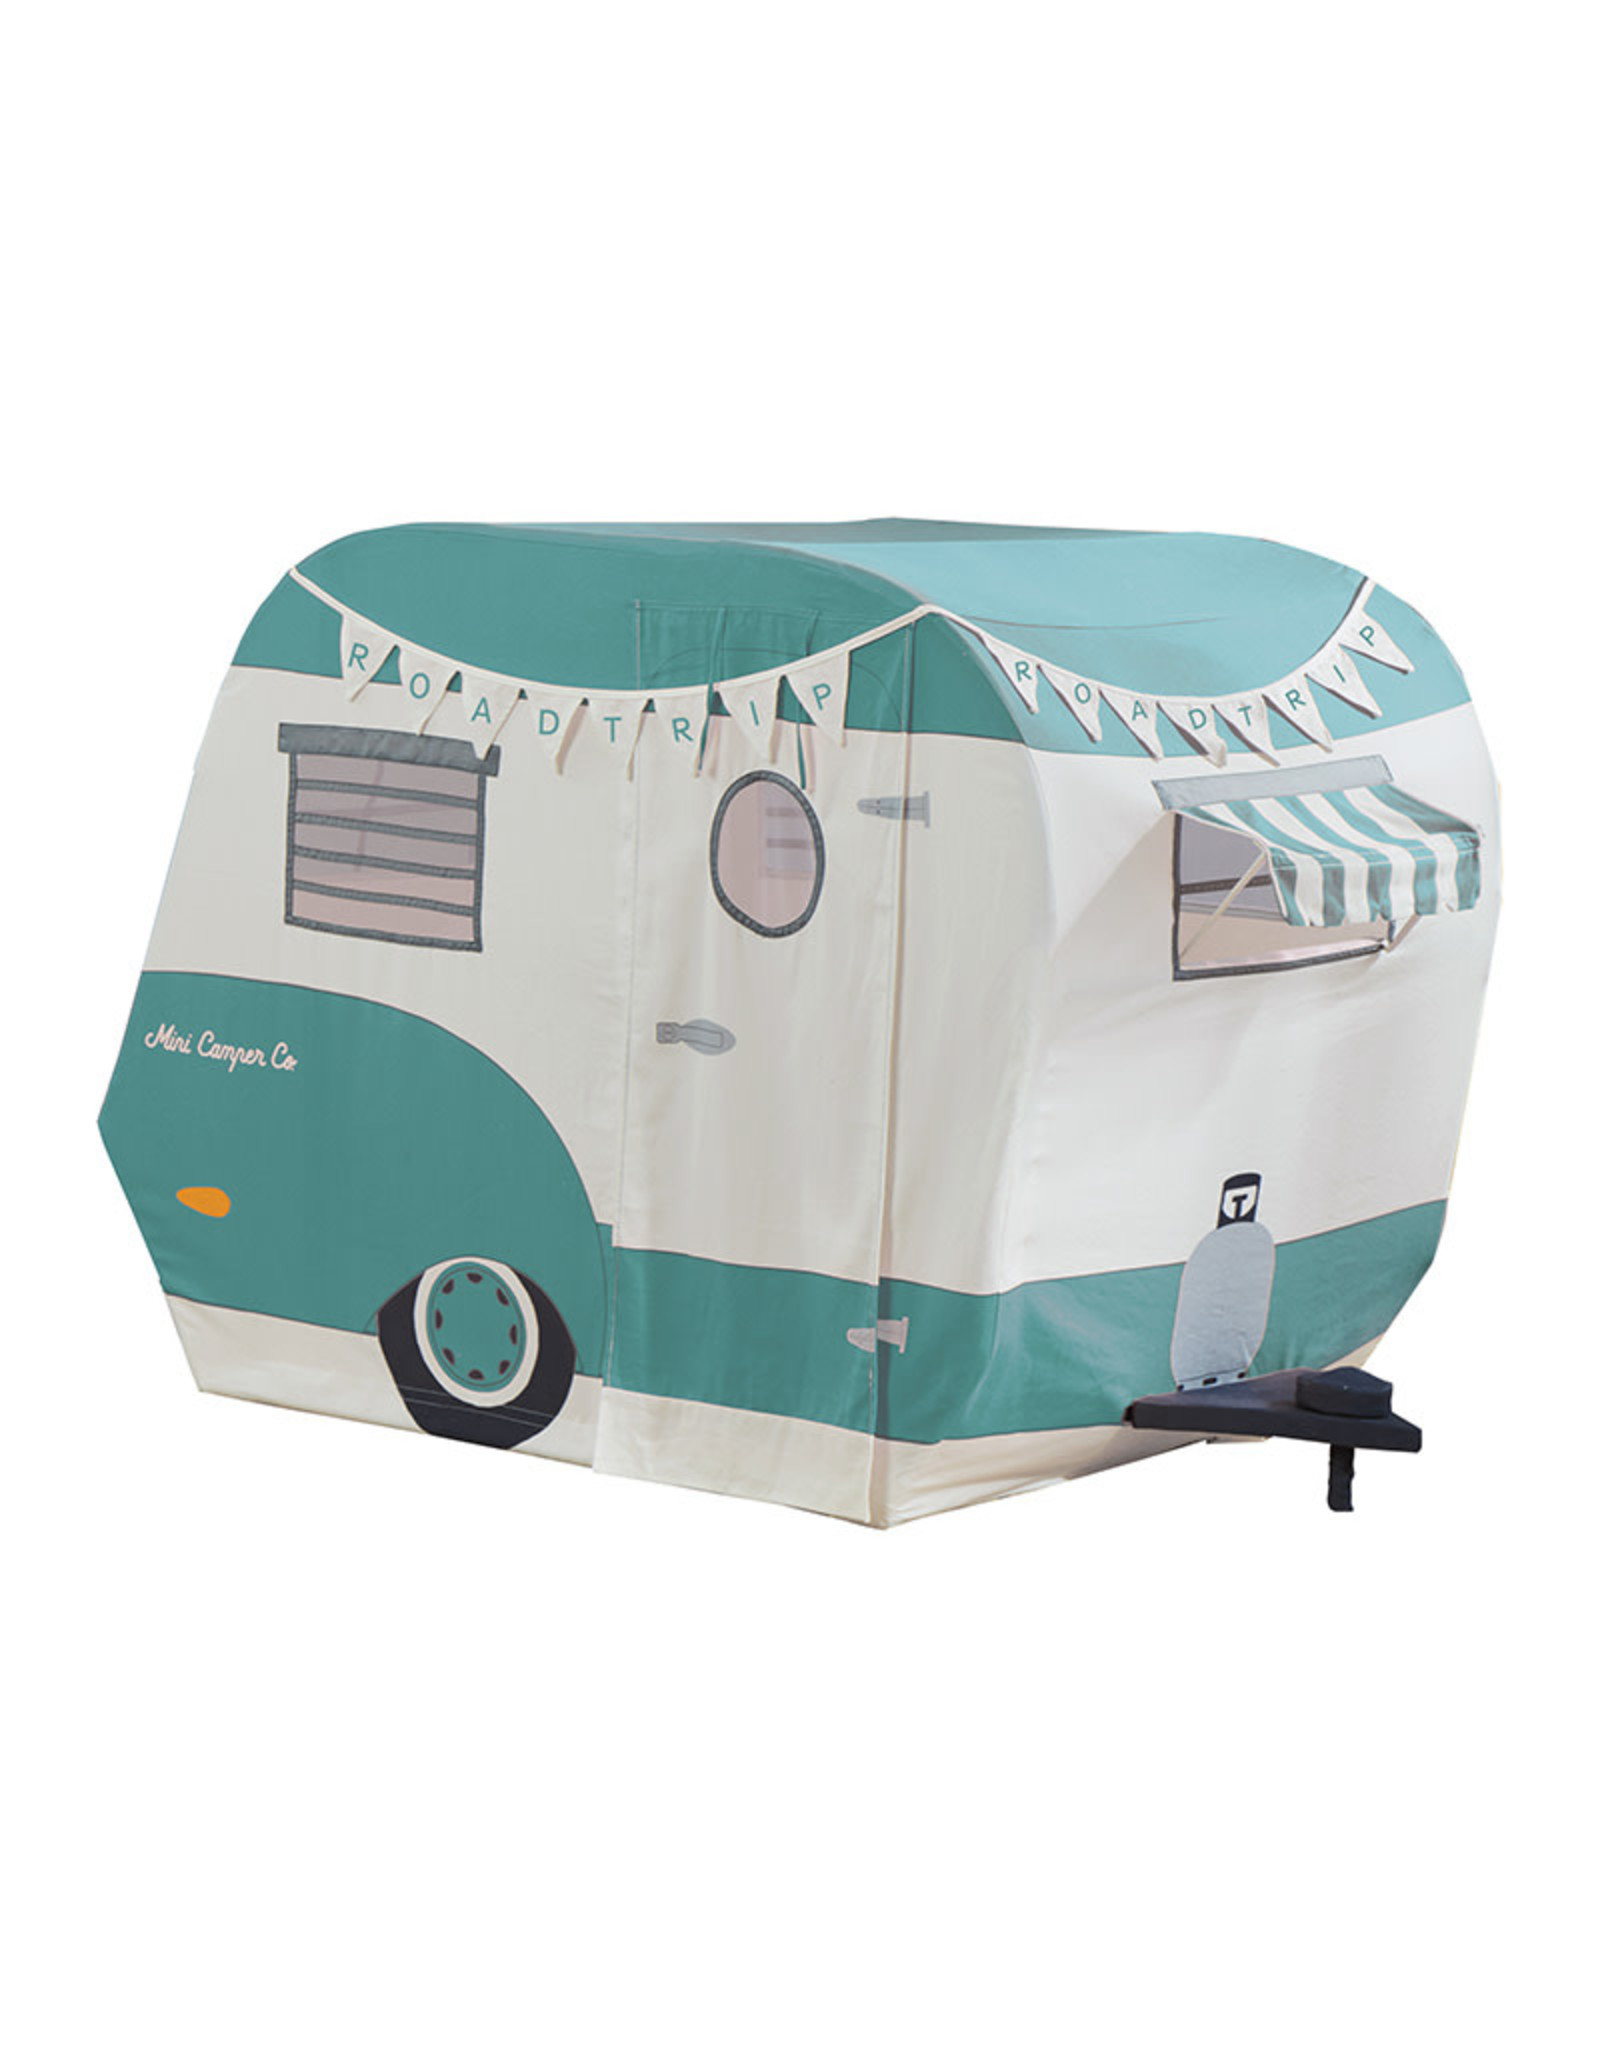 Asweets Blue Road Trip Camper